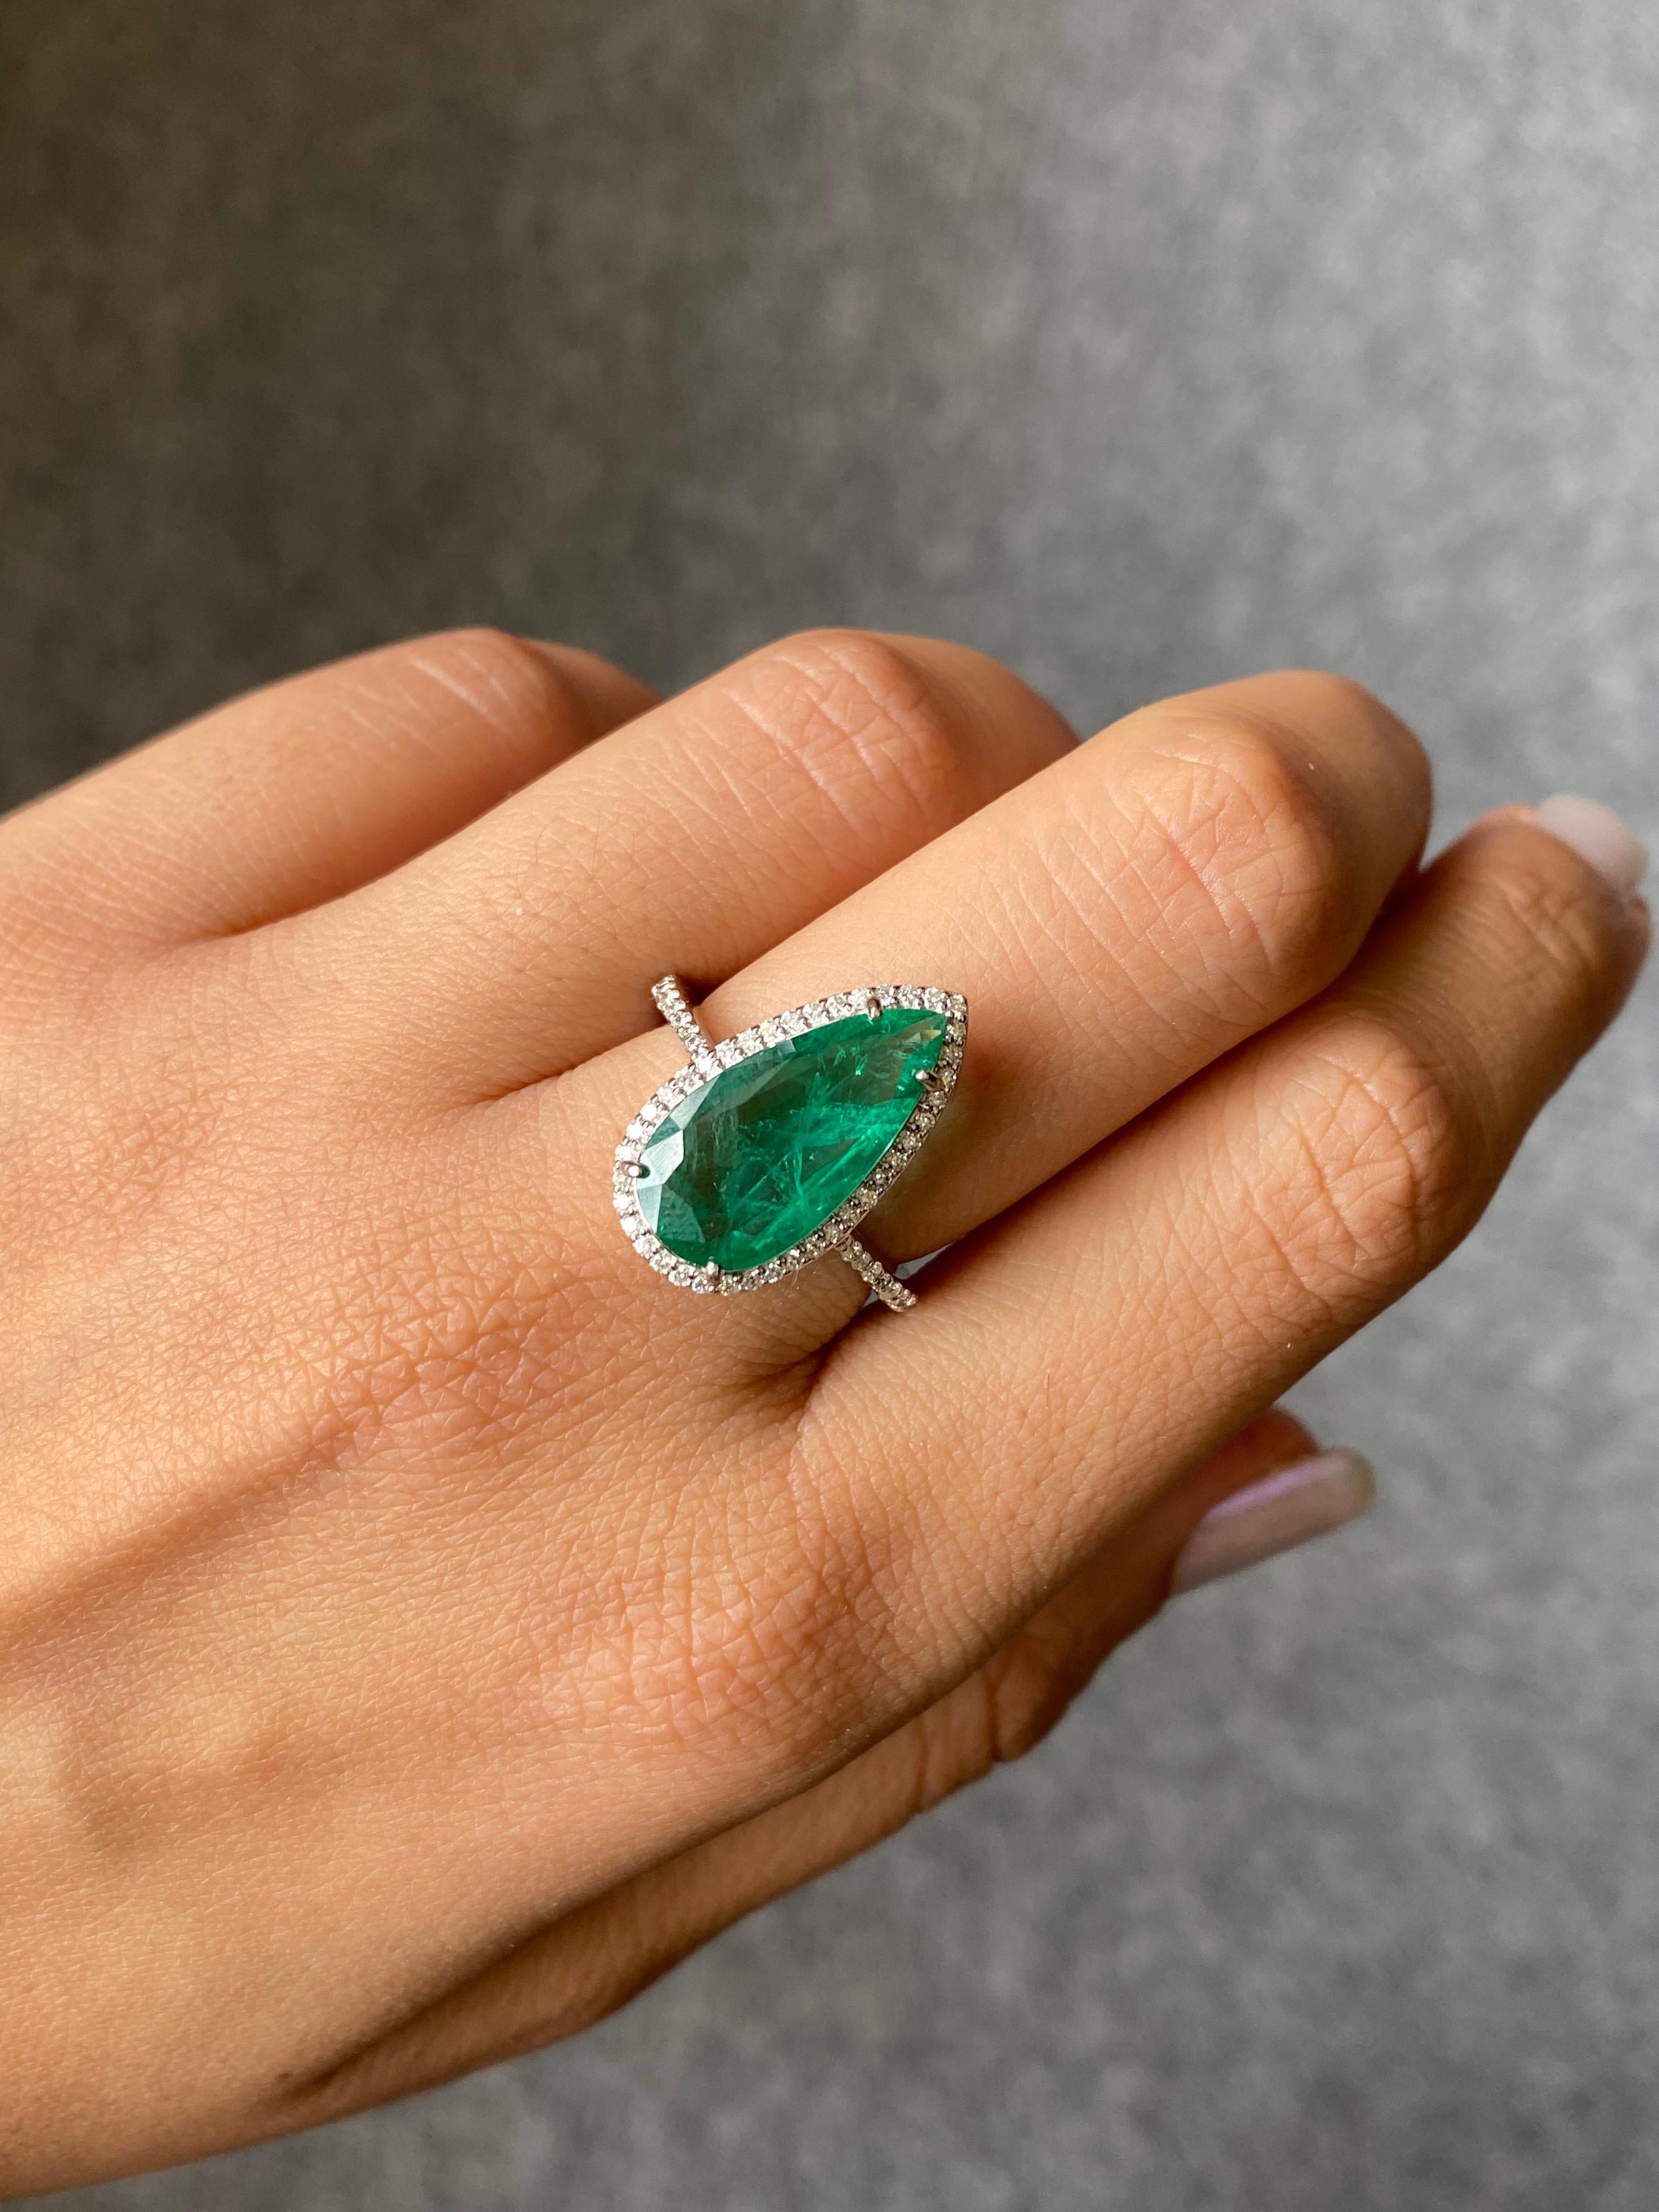 A classic 3.20 carat pear shaped Zambian Emerald, with a 0.4 carat White Diamond halo - all set in solid 18K White Gold. The Emerald is natural, completely transparent with a great cut and vivid green color. The ring is currently sized at US 7, can